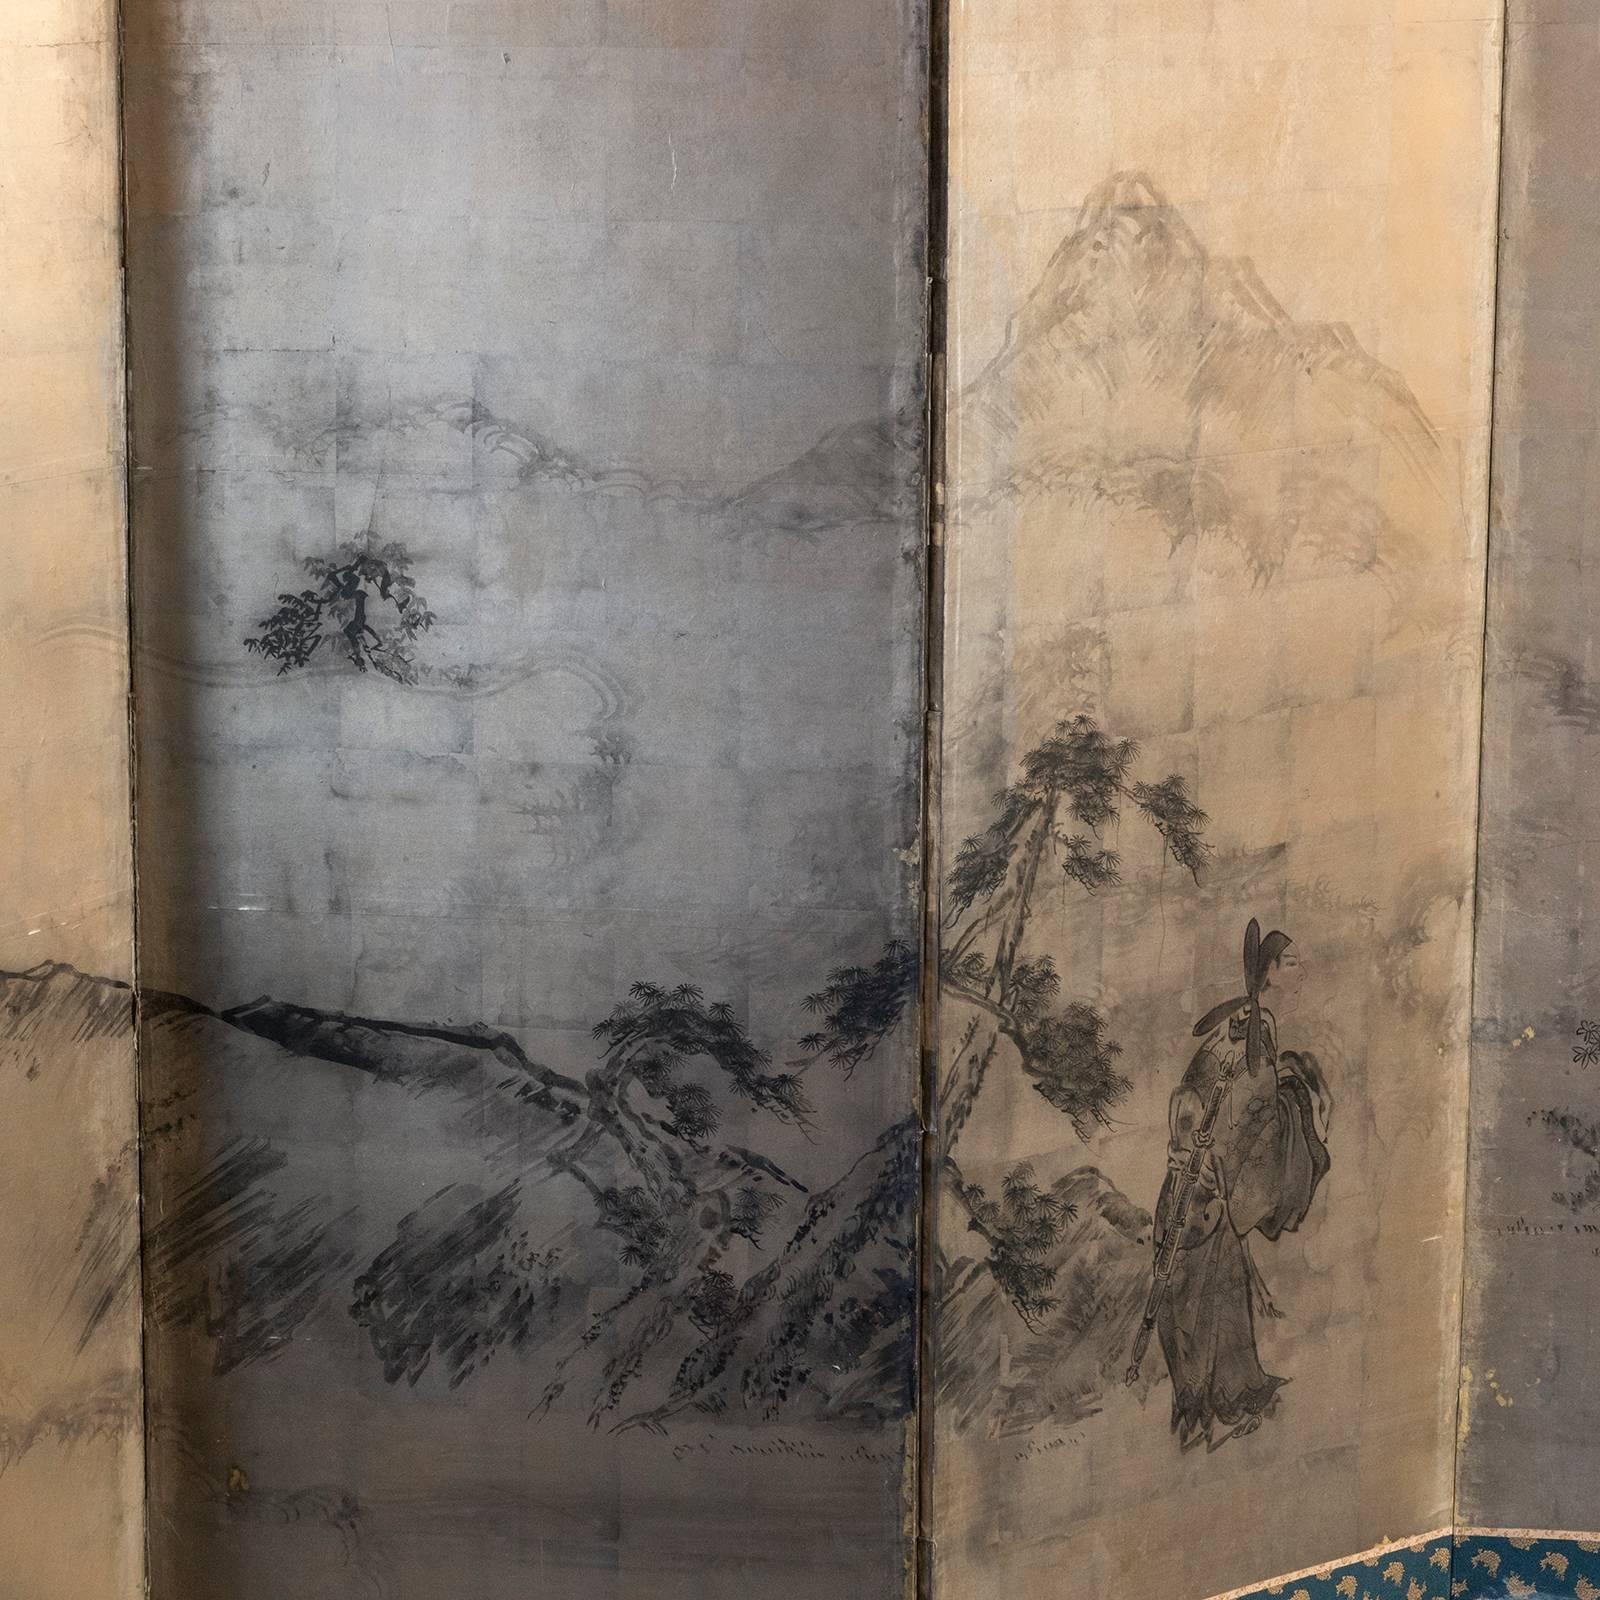 Japanese screen, ink landscape and figurative ink painting over gold leaf, silk brocade border, laquered wood frame and brass details, the back side have several rips on the paper.